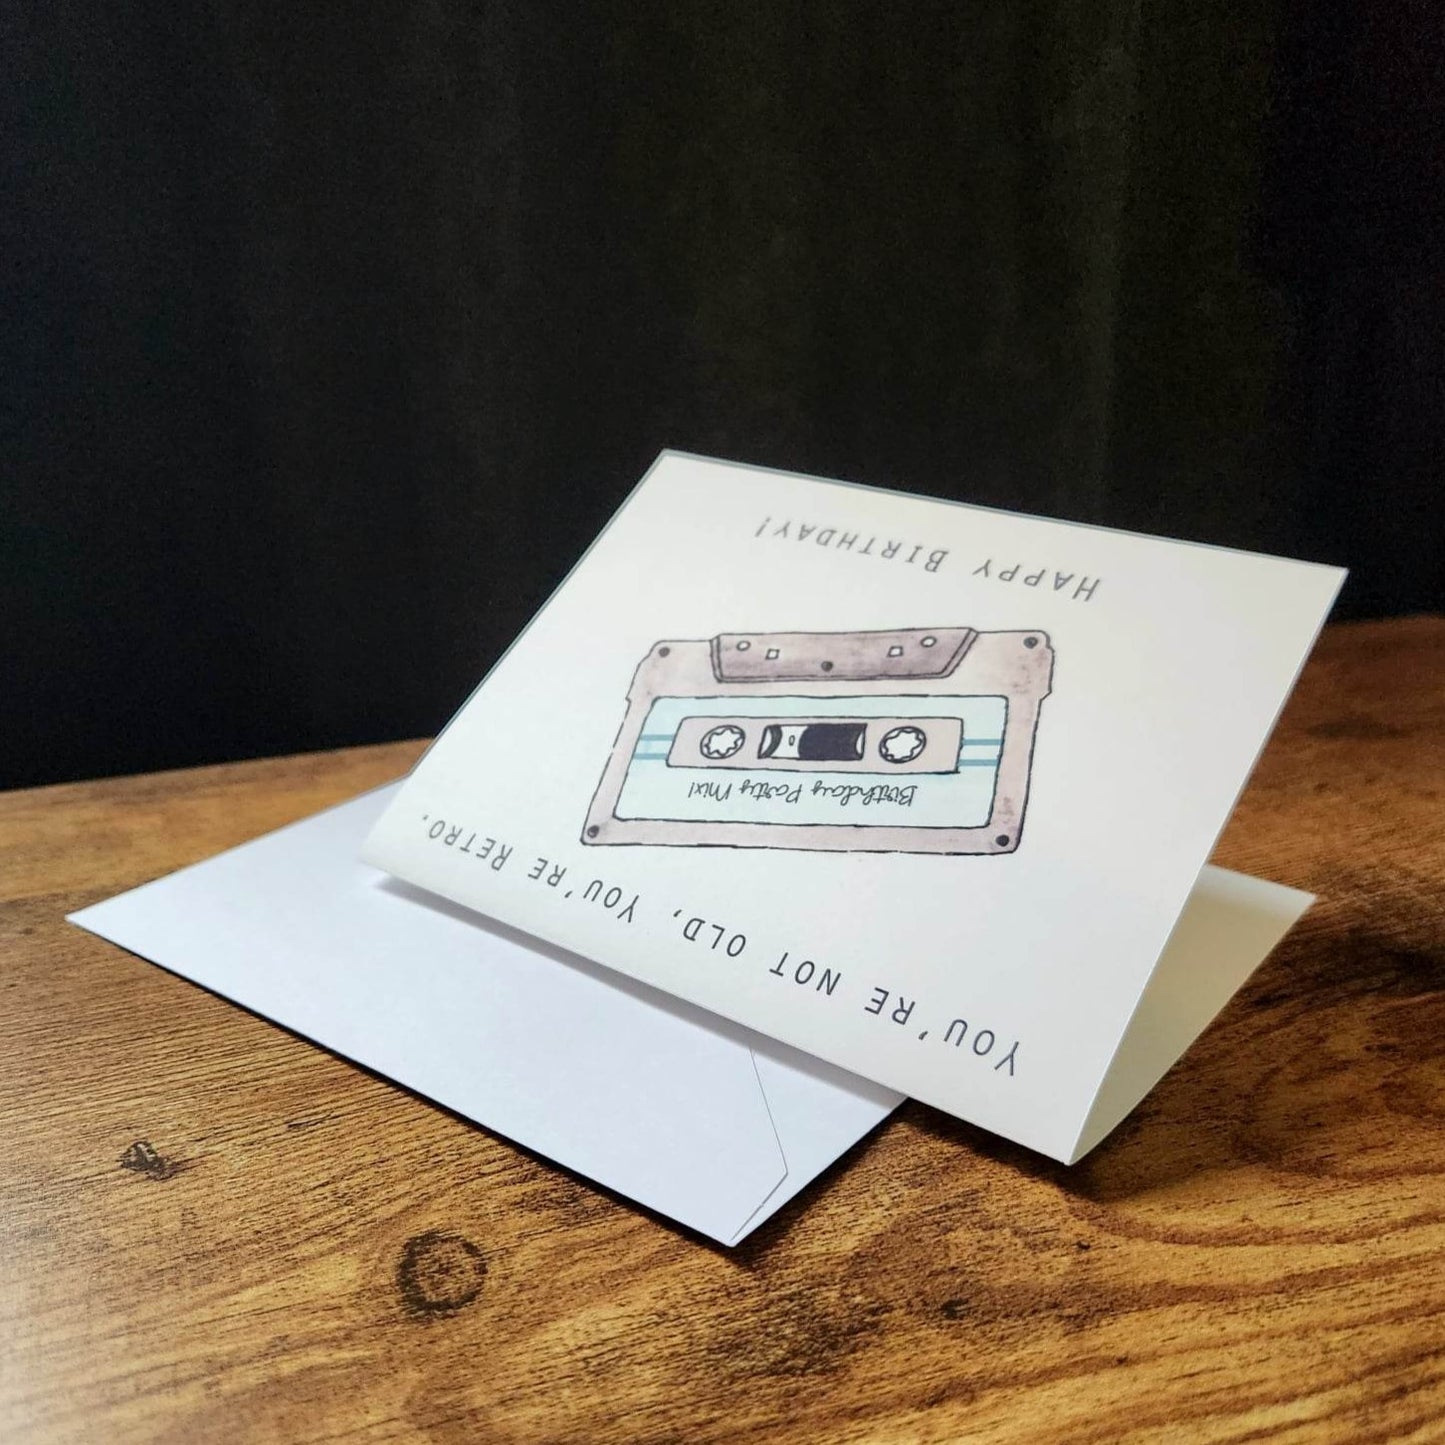 Retro cassette birthday card, You're not old You're retro, Happy Birthday card, Mix tape birthday card, Music birthday card, Vintage card